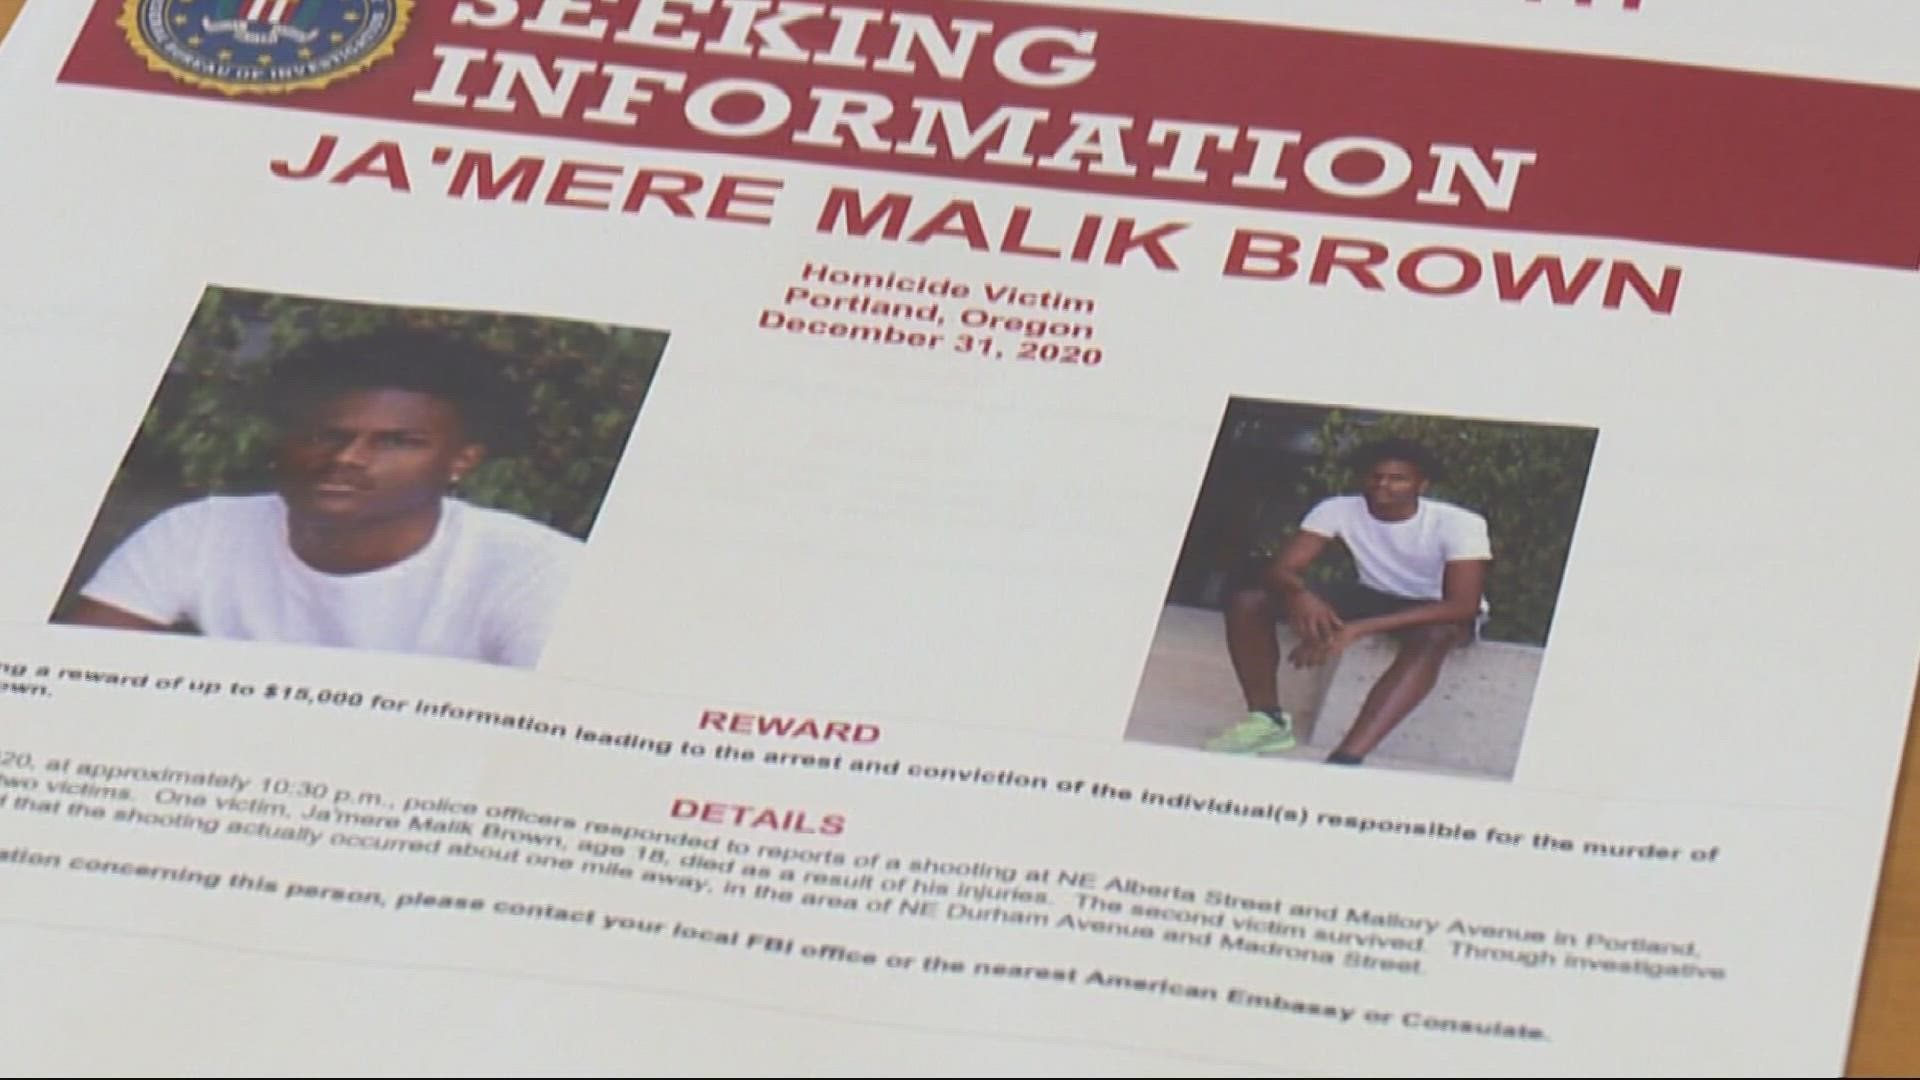 Ja’mere Brown was 18 years old when he was killed in a shooting on New Year’s Eve in 2020. The FBI is adding more money to a reward for information about his killer.